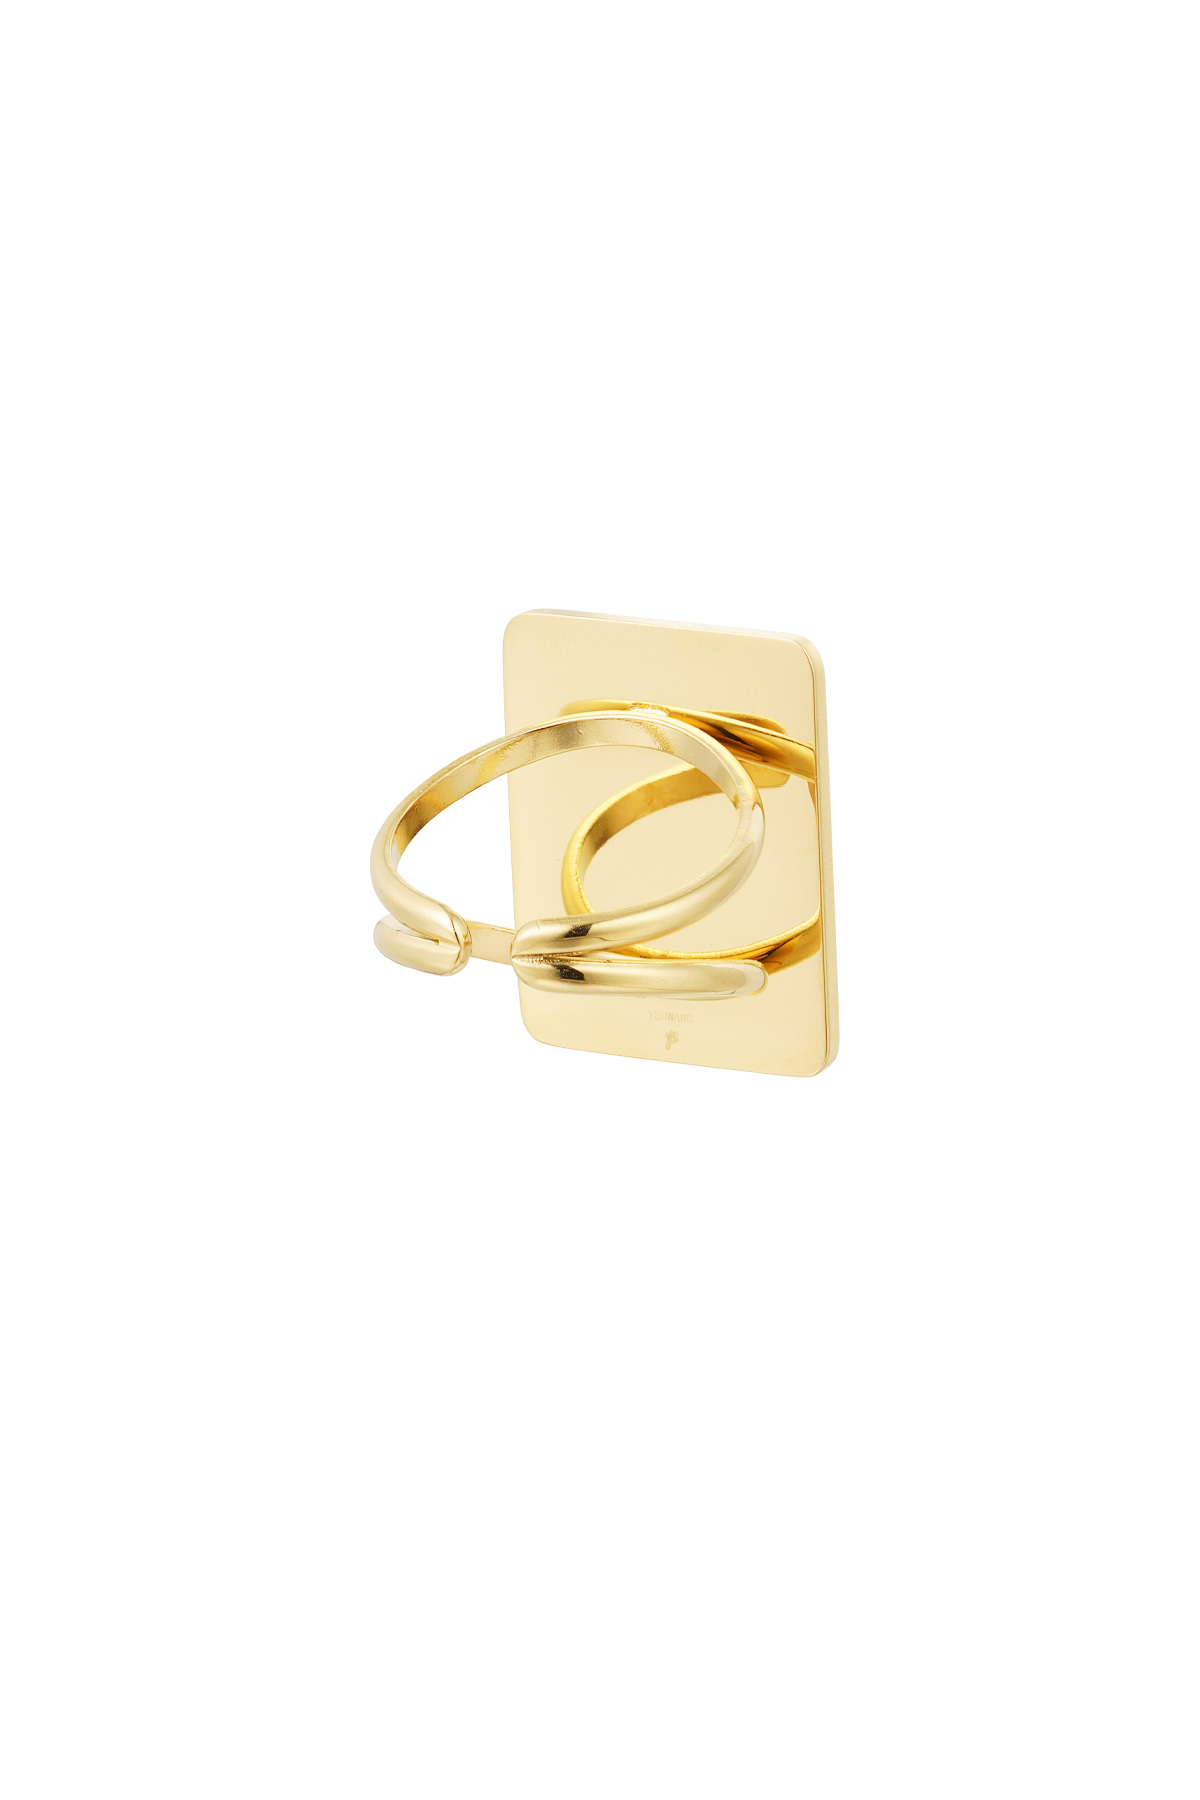 Ring square stone - gold/pink h5 Picture4